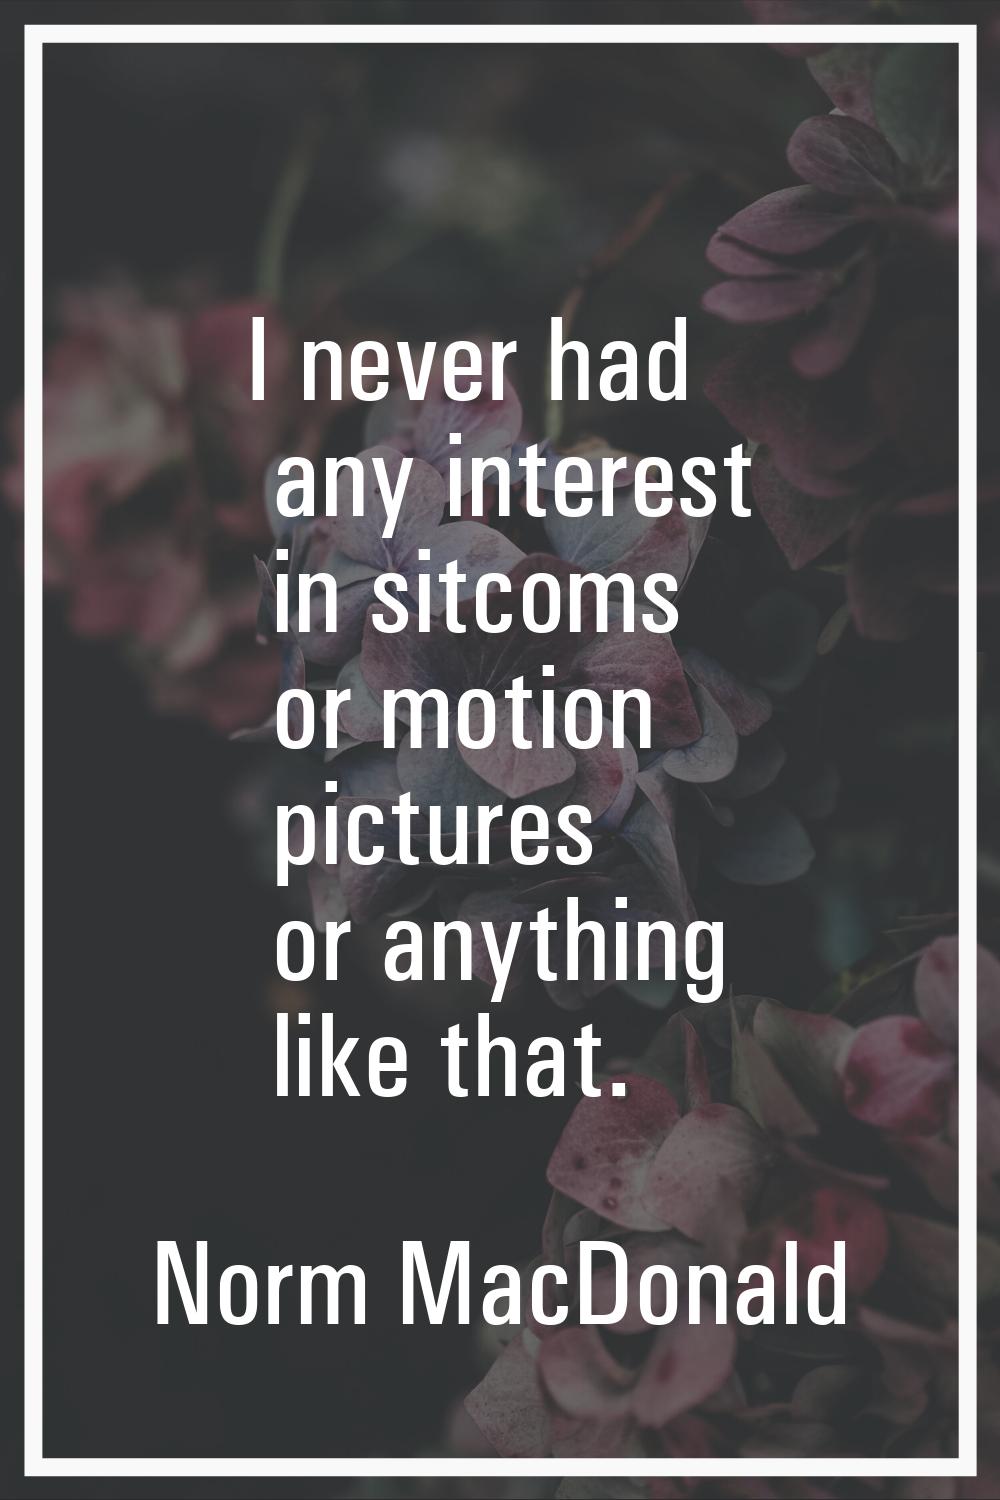 I never had any interest in sitcoms or motion pictures or anything like that.